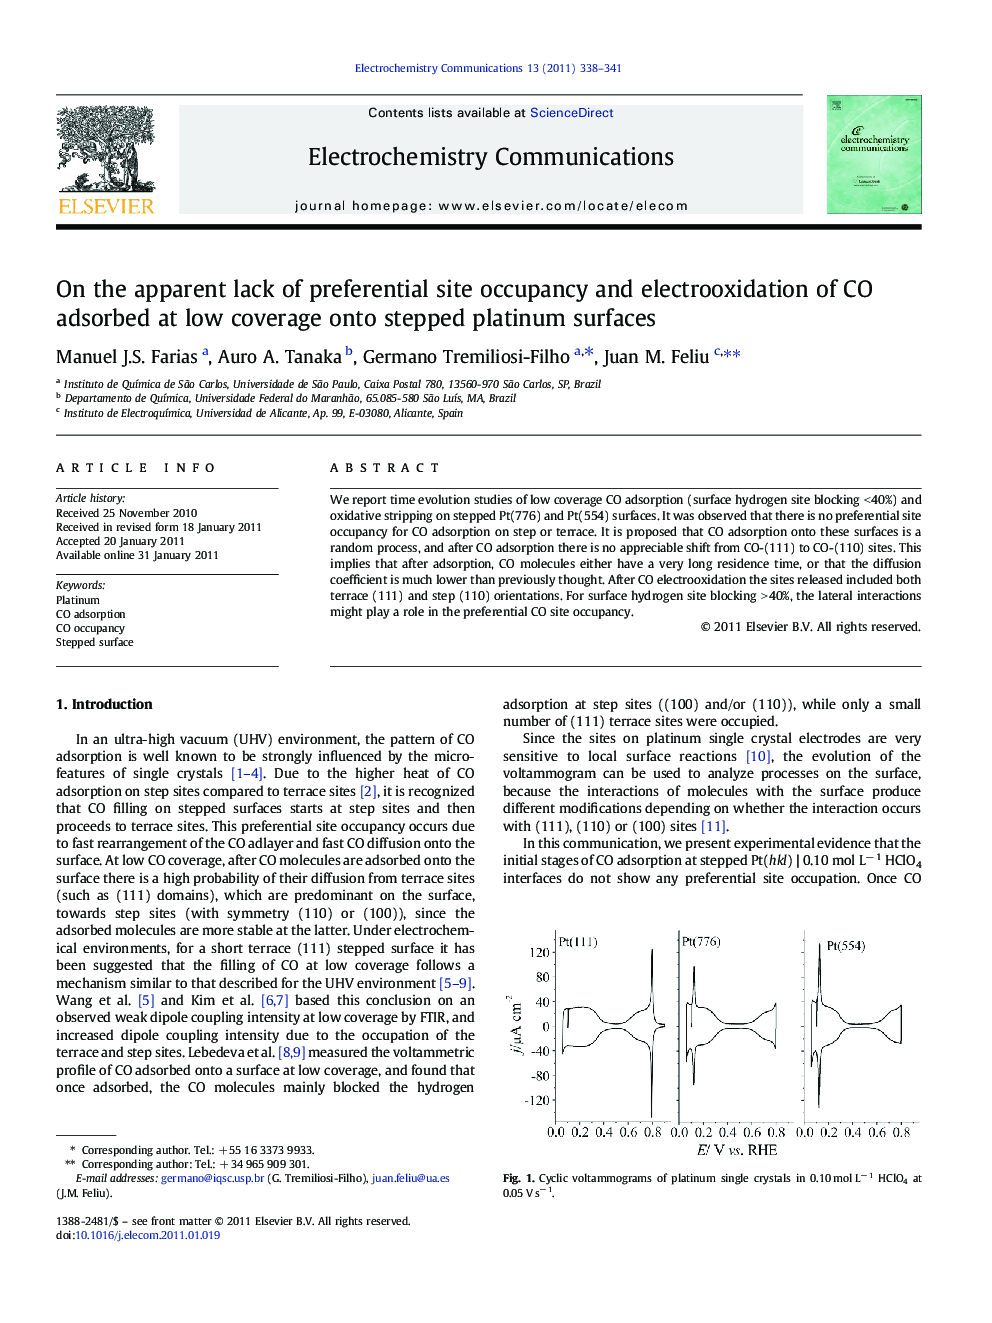 On the apparent lack of preferential site occupancy and electrooxidation of CO adsorbed at low coverage onto stepped platinum surfaces